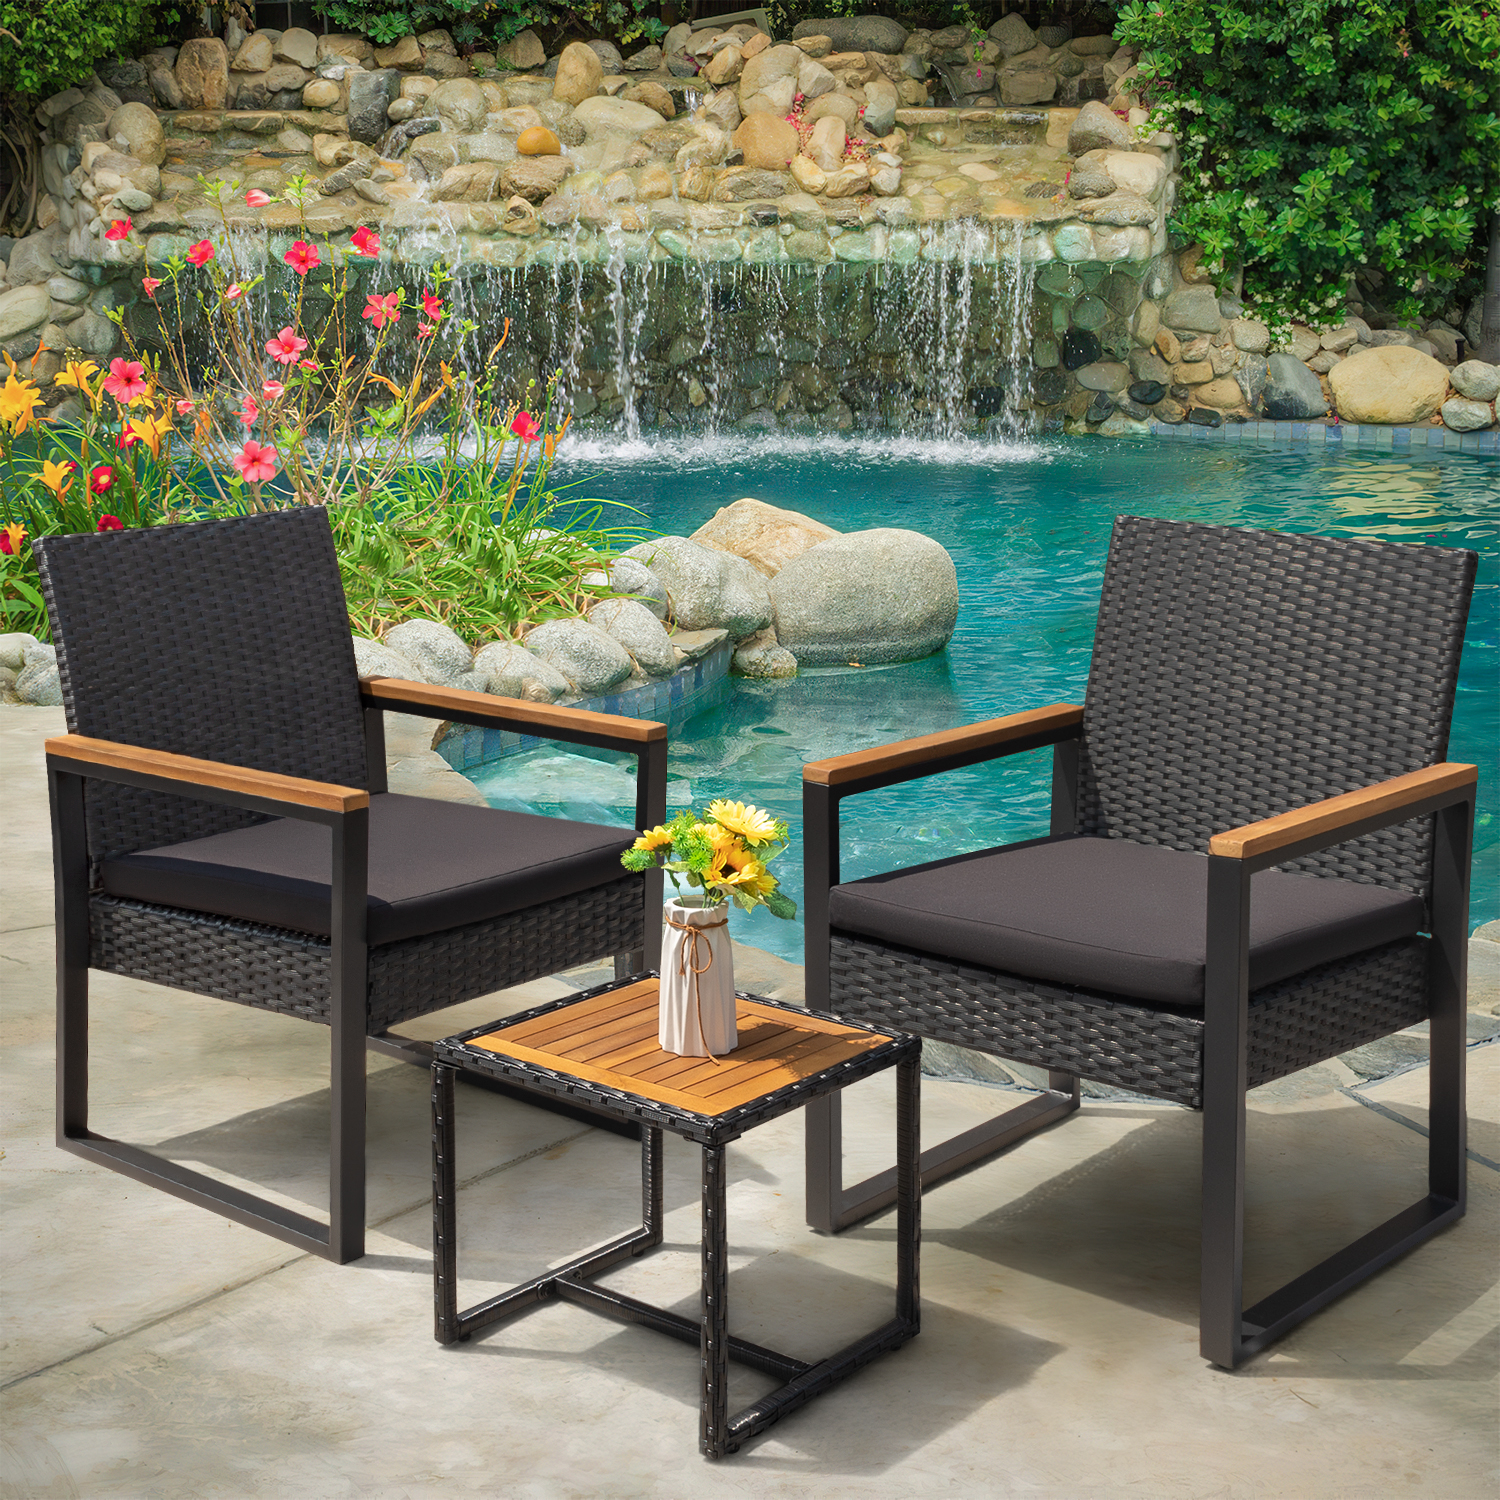 Devoko 3 Pieces Patio Conversation Set Outdoor Rattan Chair Set of 2 with Wood Coffee Table, Black - image 3 of 7